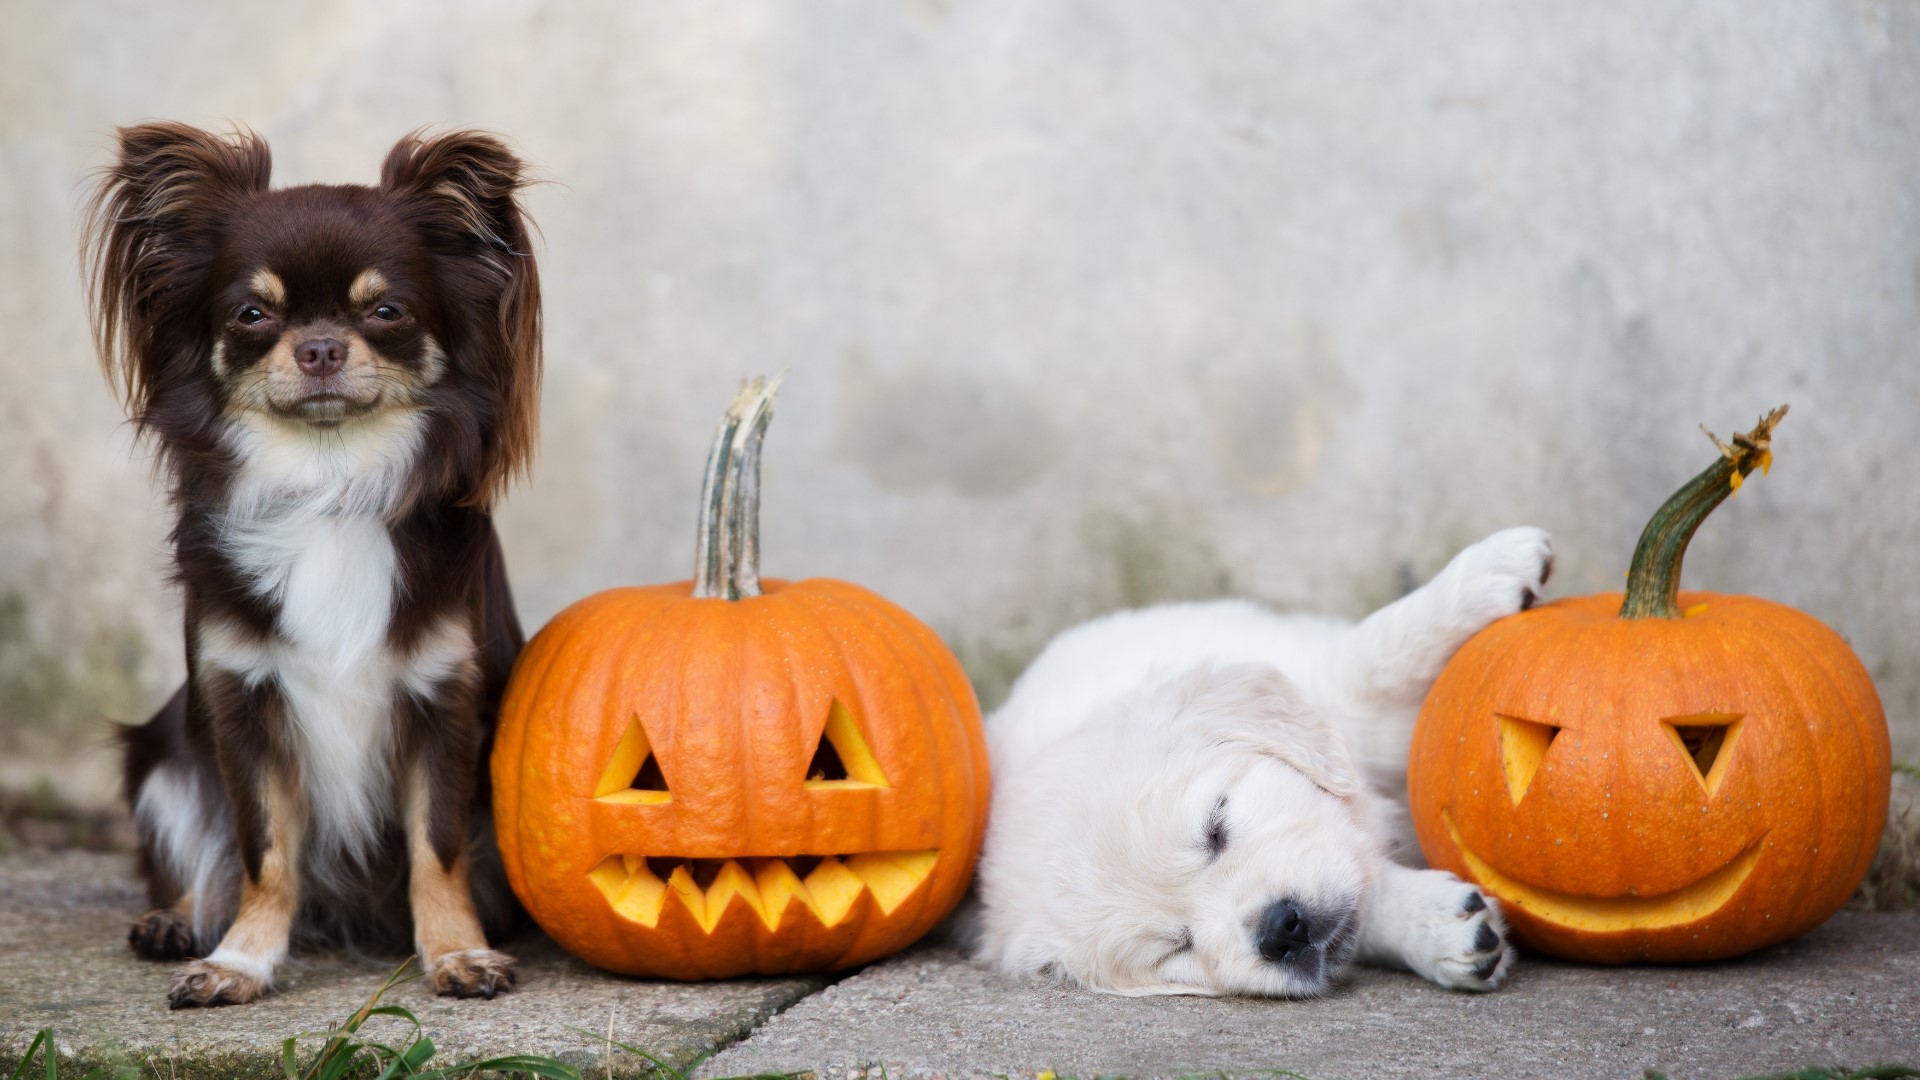 An aspect of trick-or-treating to consider is what to do with furry friends, especially those tagging along for the fun.